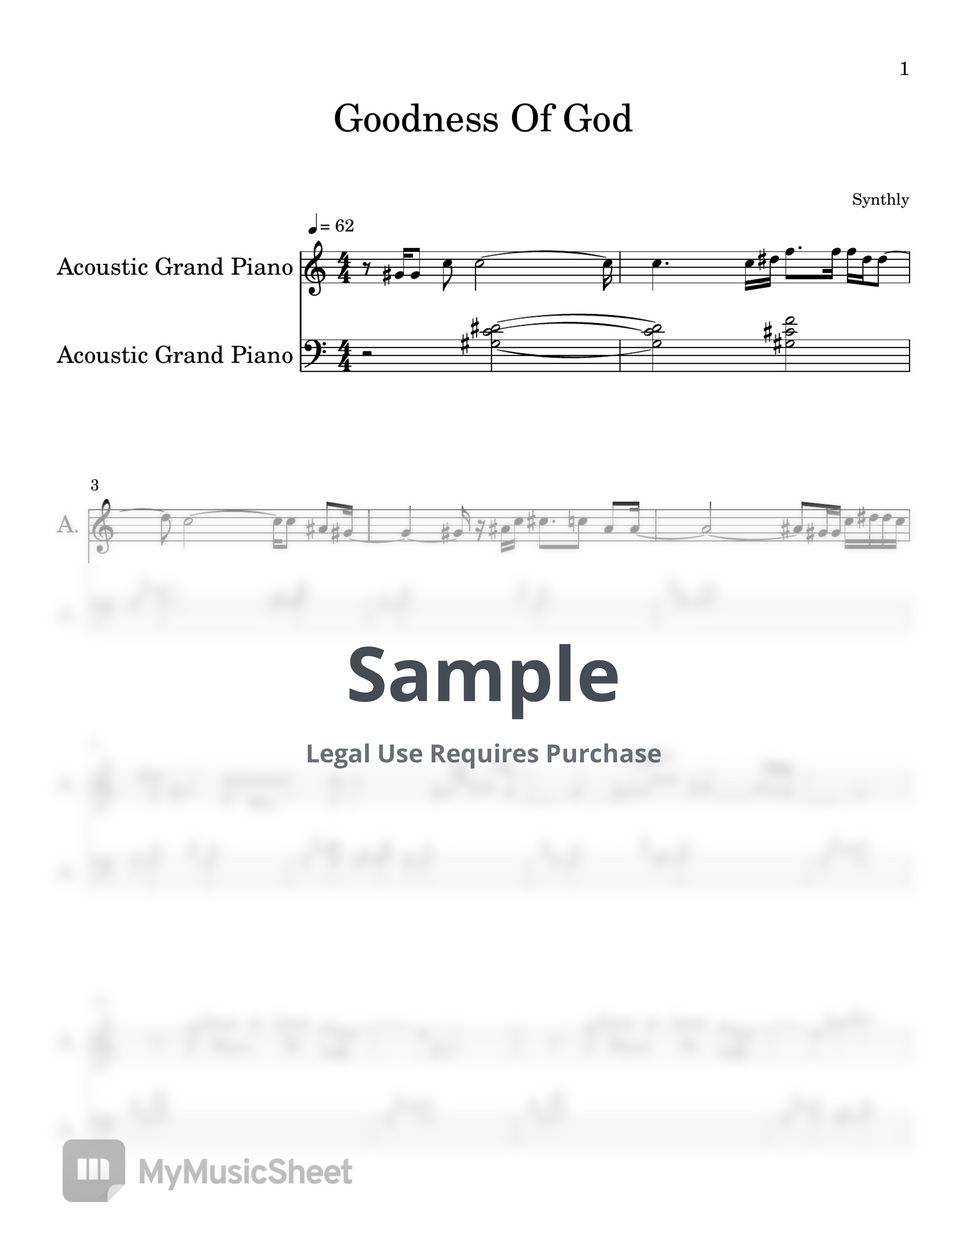 Bethel Music - Goodness Of God (EASY PIANO SHEET) by Synthly